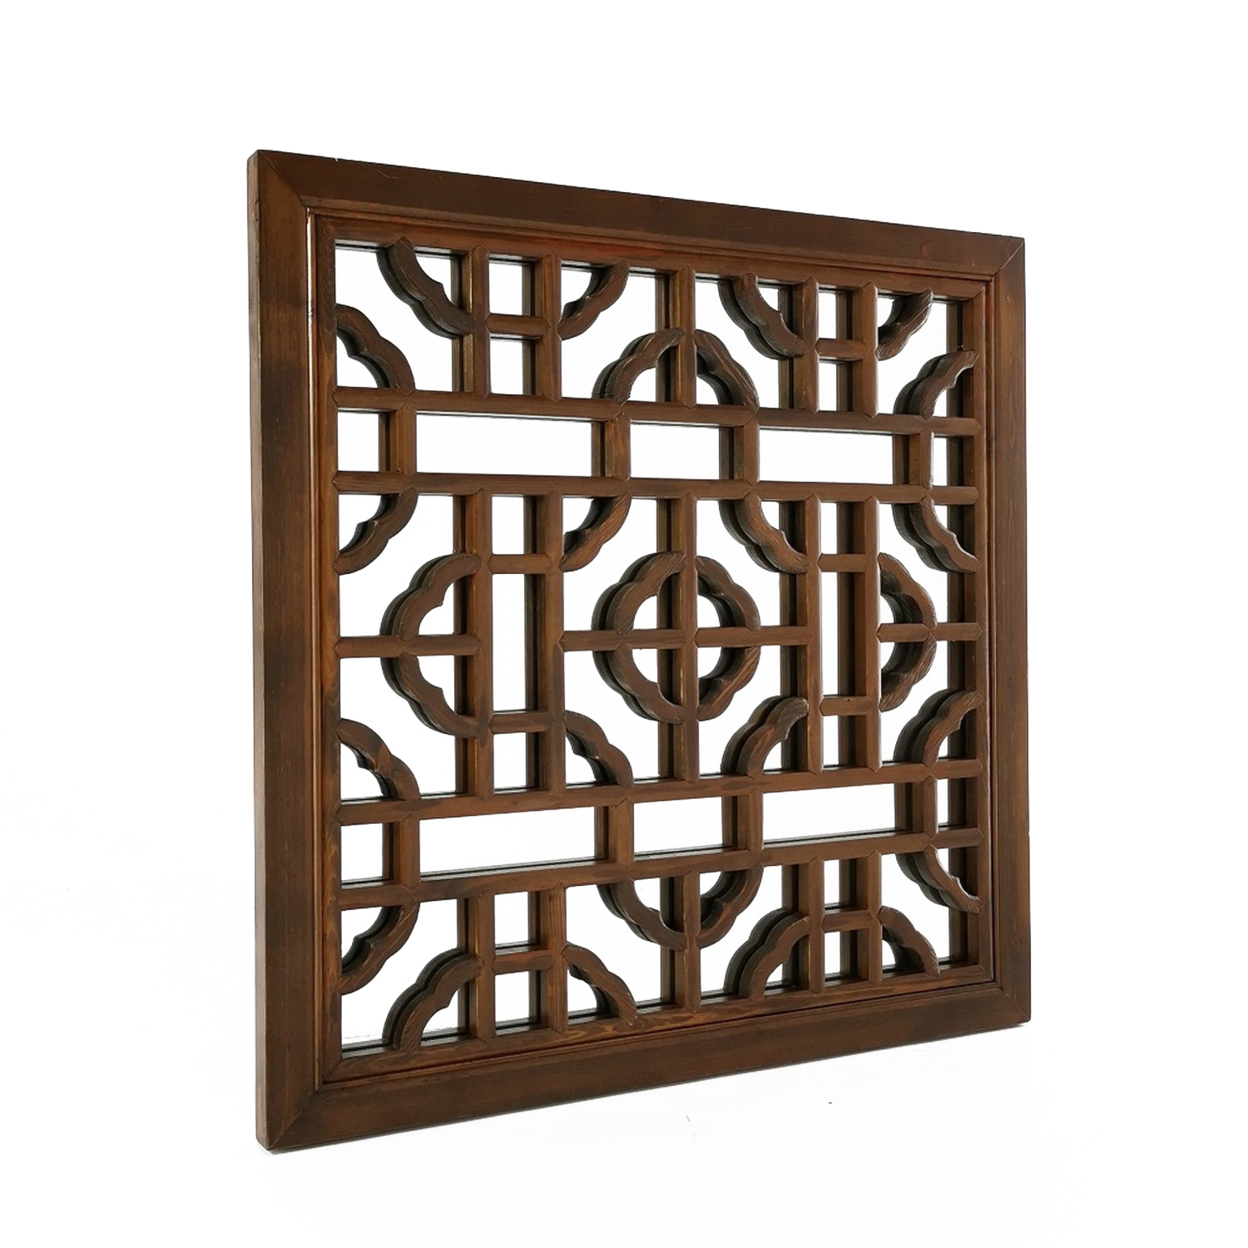 Mirror With Cut Out Geometric Motifs And Square Frame, Brown- Saltoro Sherpi